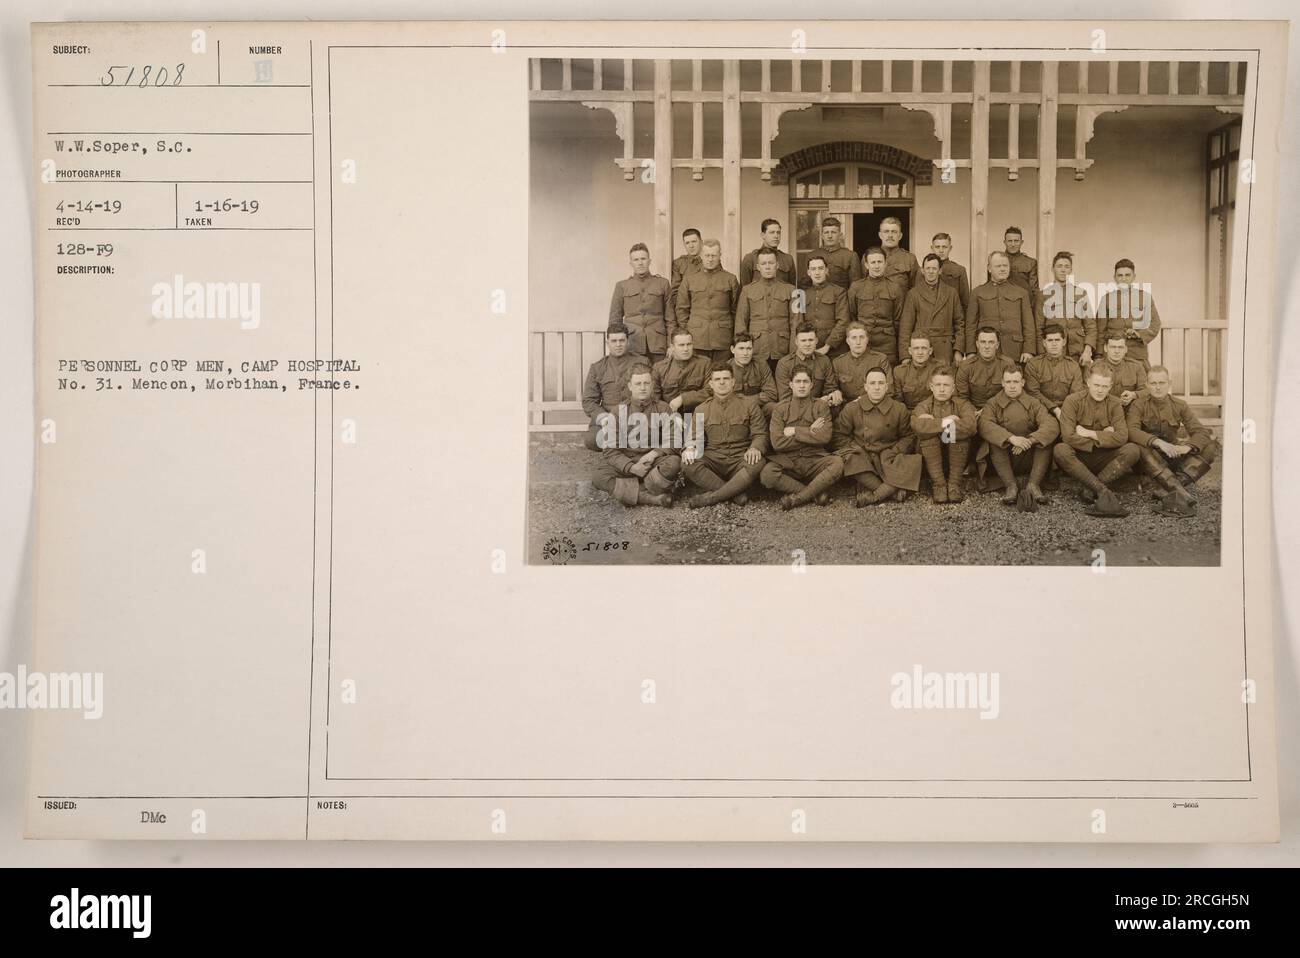 Personnel Corps men are seen at Camp Hospital No. 31 in Menc, Morbihan, France. The photo was taken on April 14, 1919, by W.W. Soper and has the reference number BUBIECT 51808. The description and notes indicate that the photograph was issued on January 16, 1919. Stock Photo